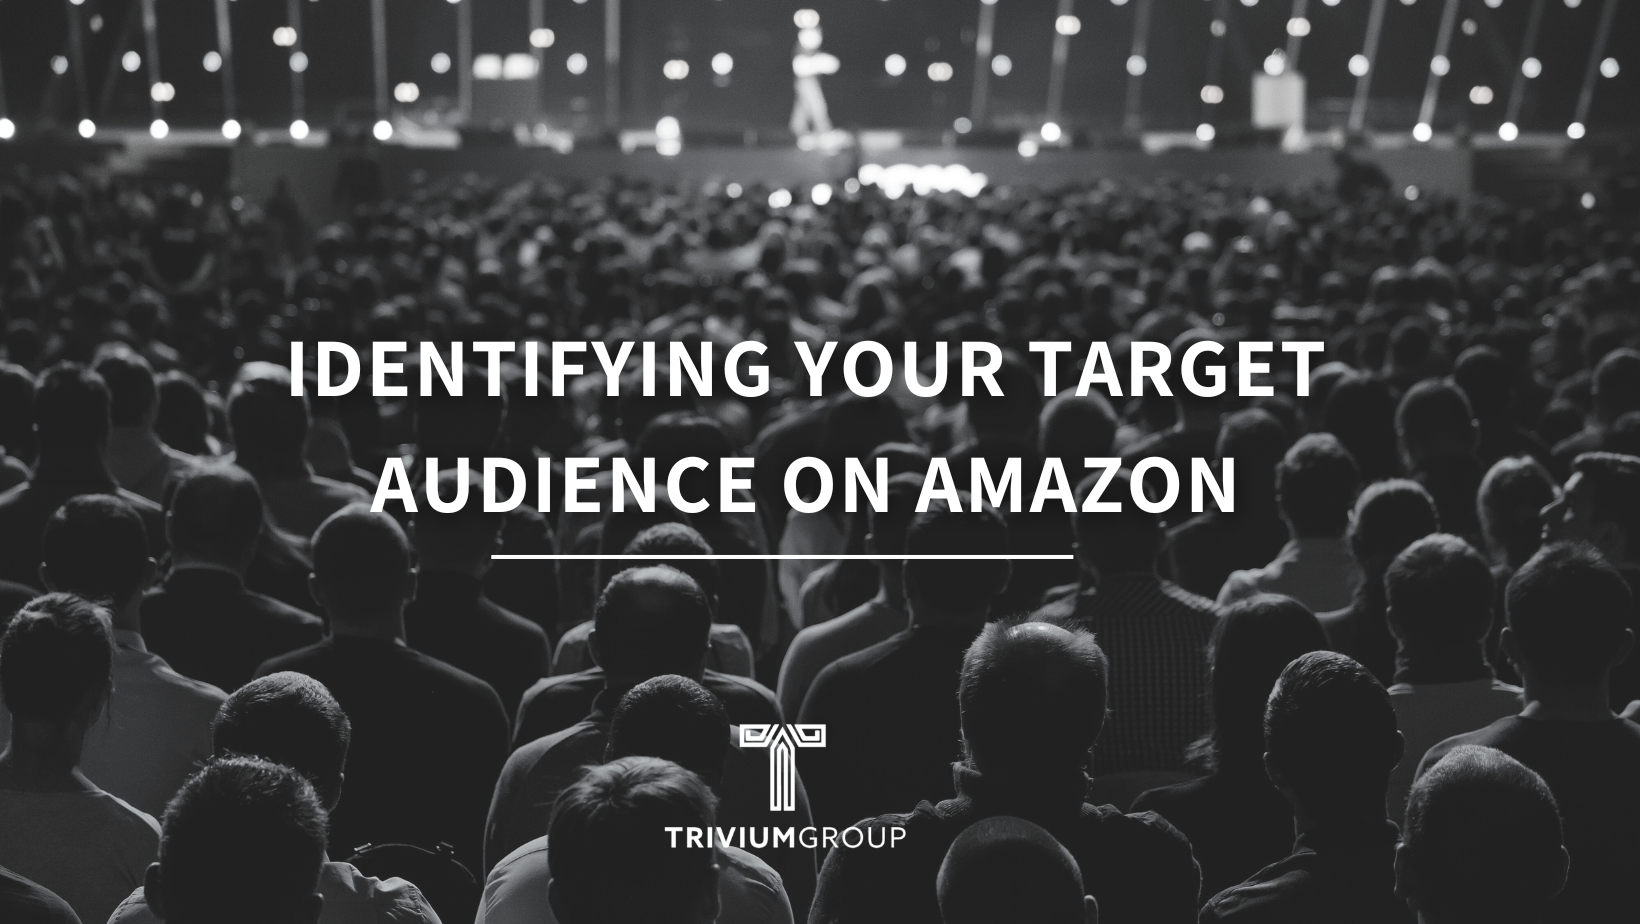 IDENTIFYING YOUR TARGET AUDIENCE ON AMAZON